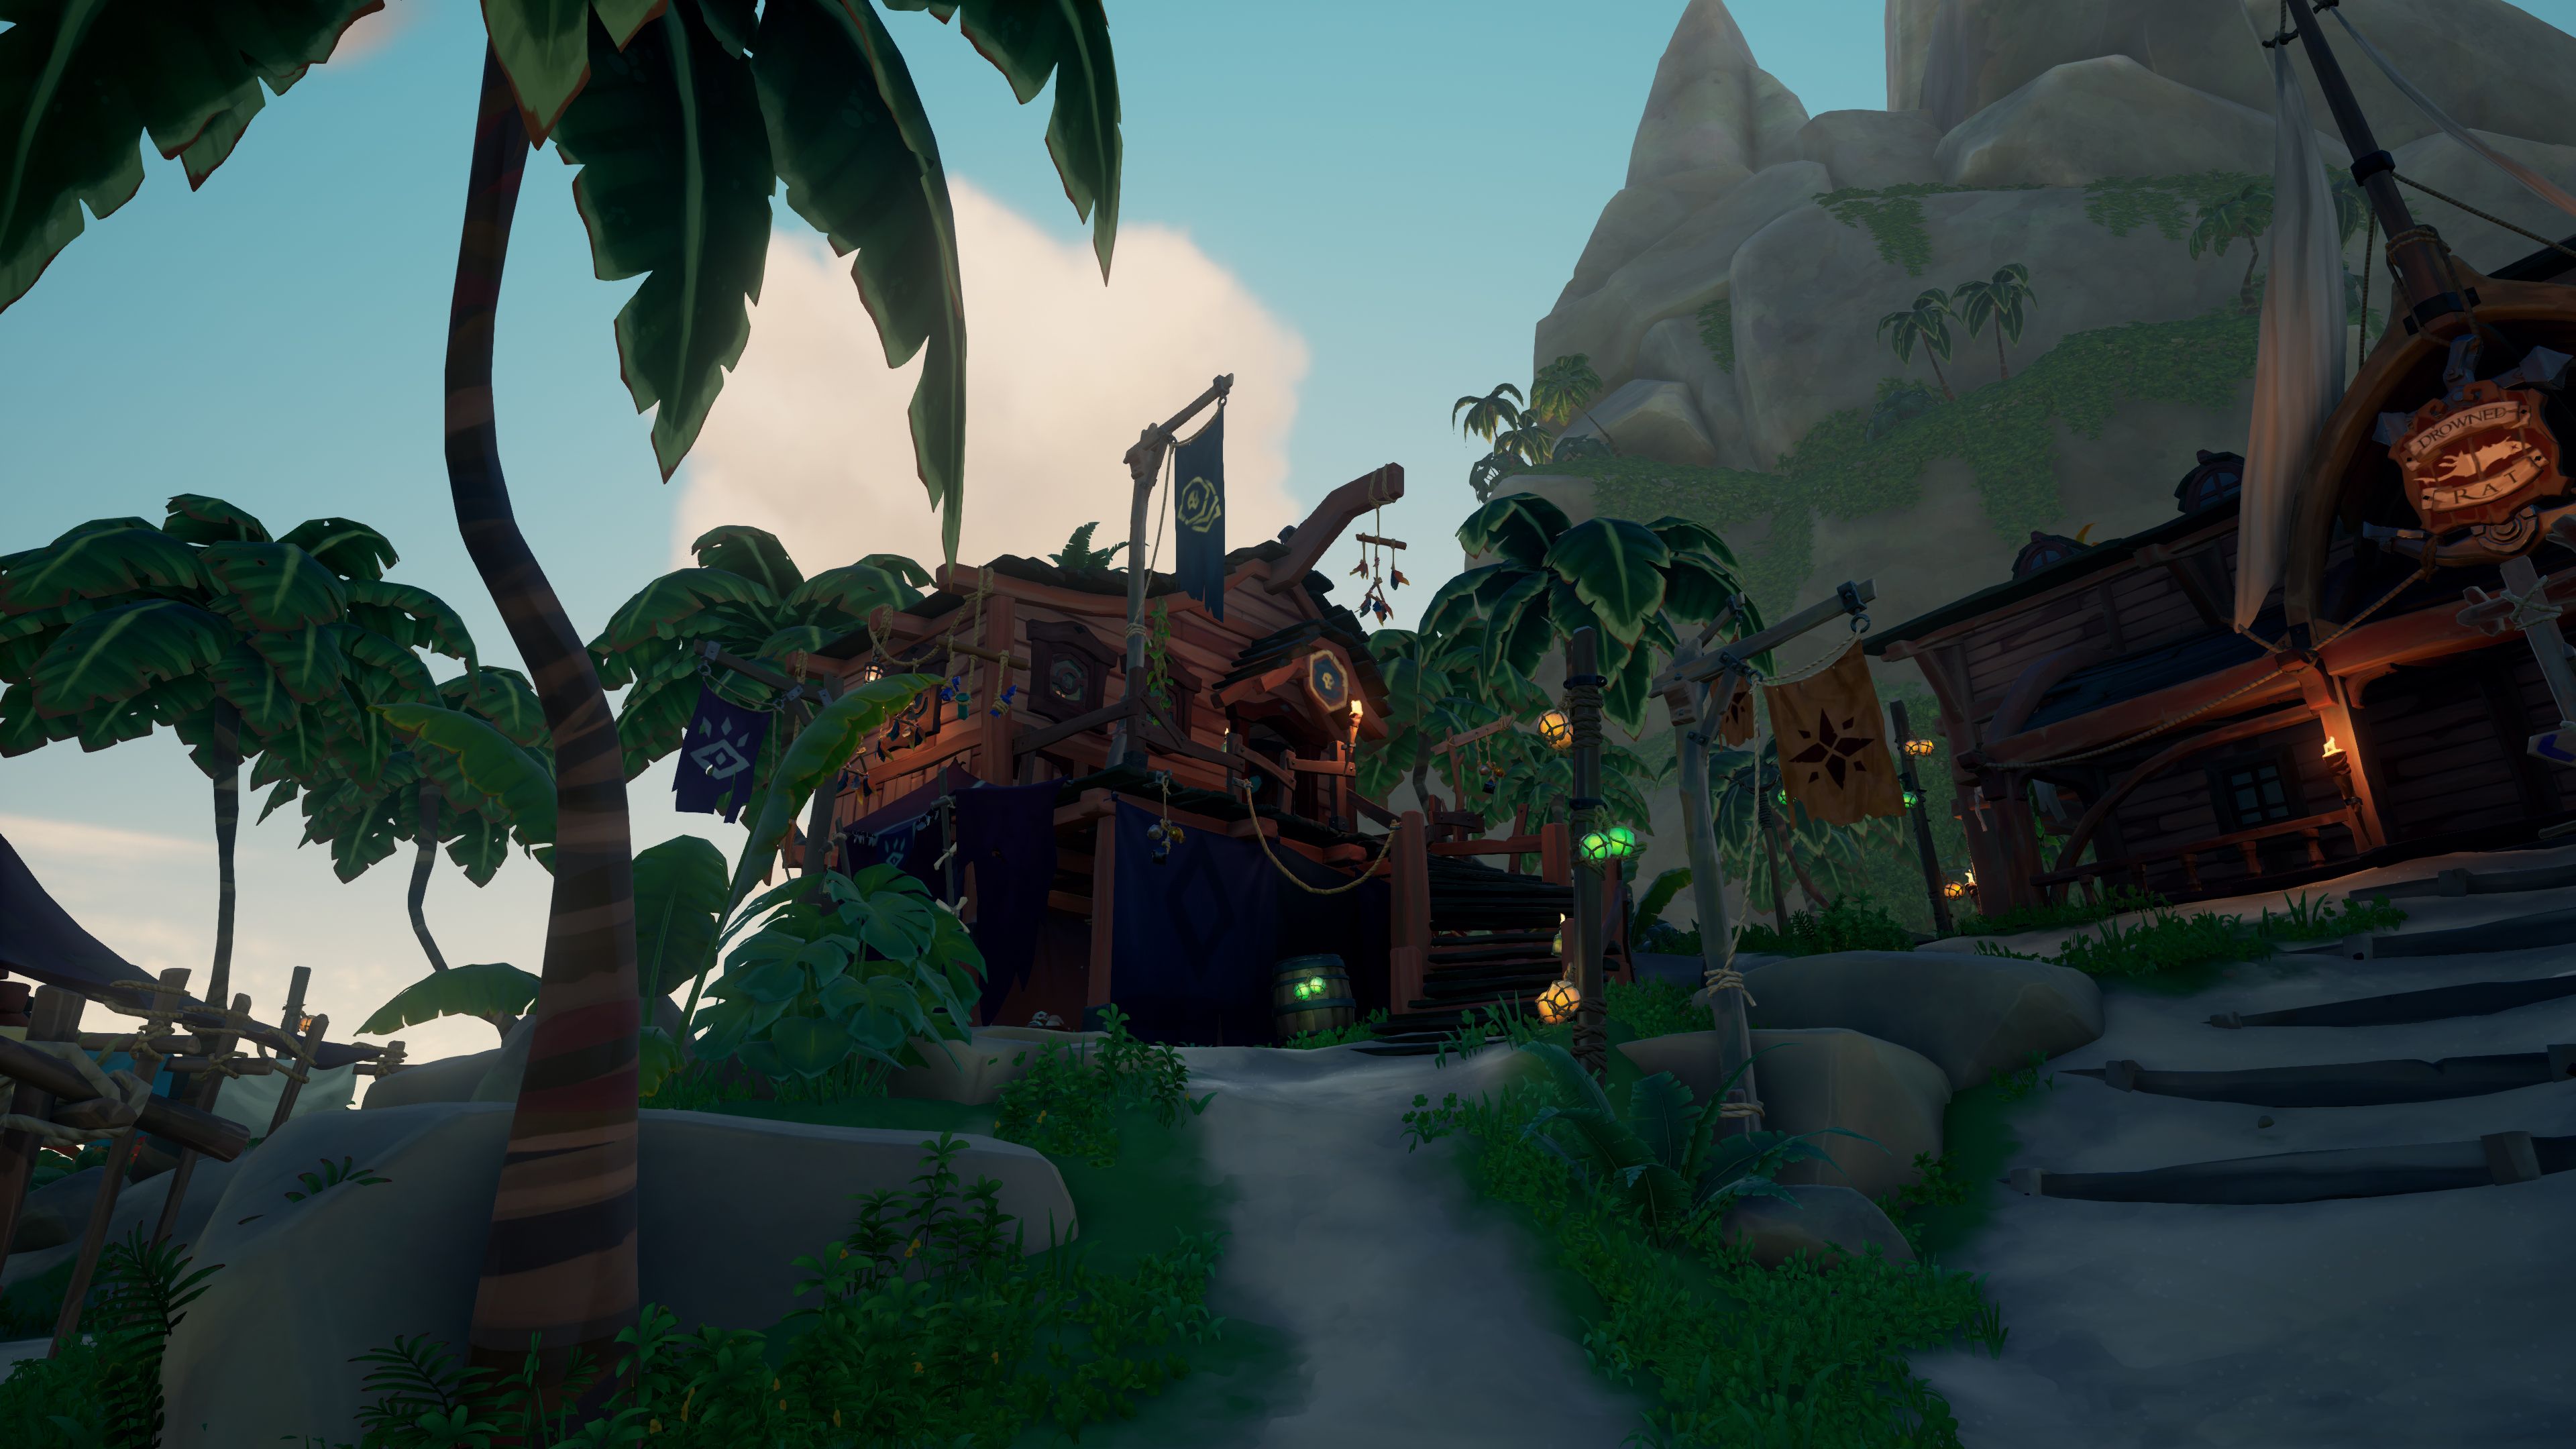 premium cosmetics shop on island outpost near tavern and order of souls